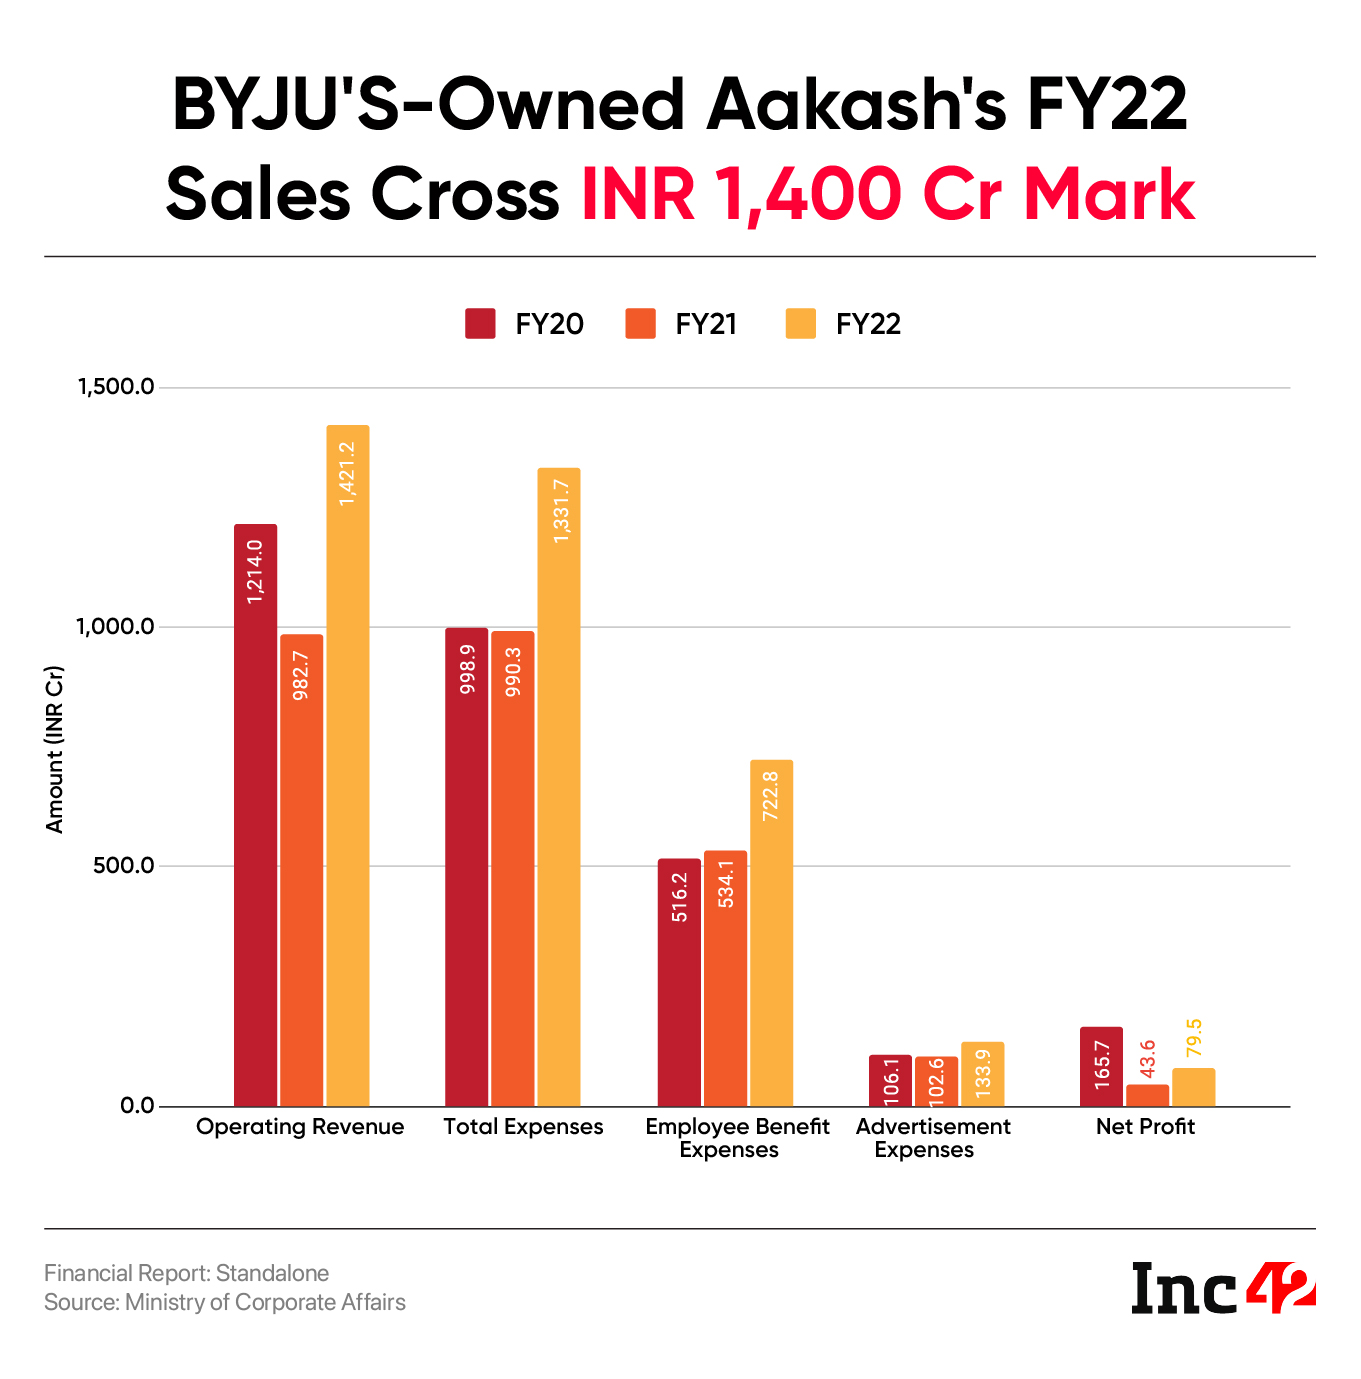 BYJU’S Owned Aakash’s Mints INR 80 Cr In FY22 Profits, Sales Cross INR 1,400 Cr Mark